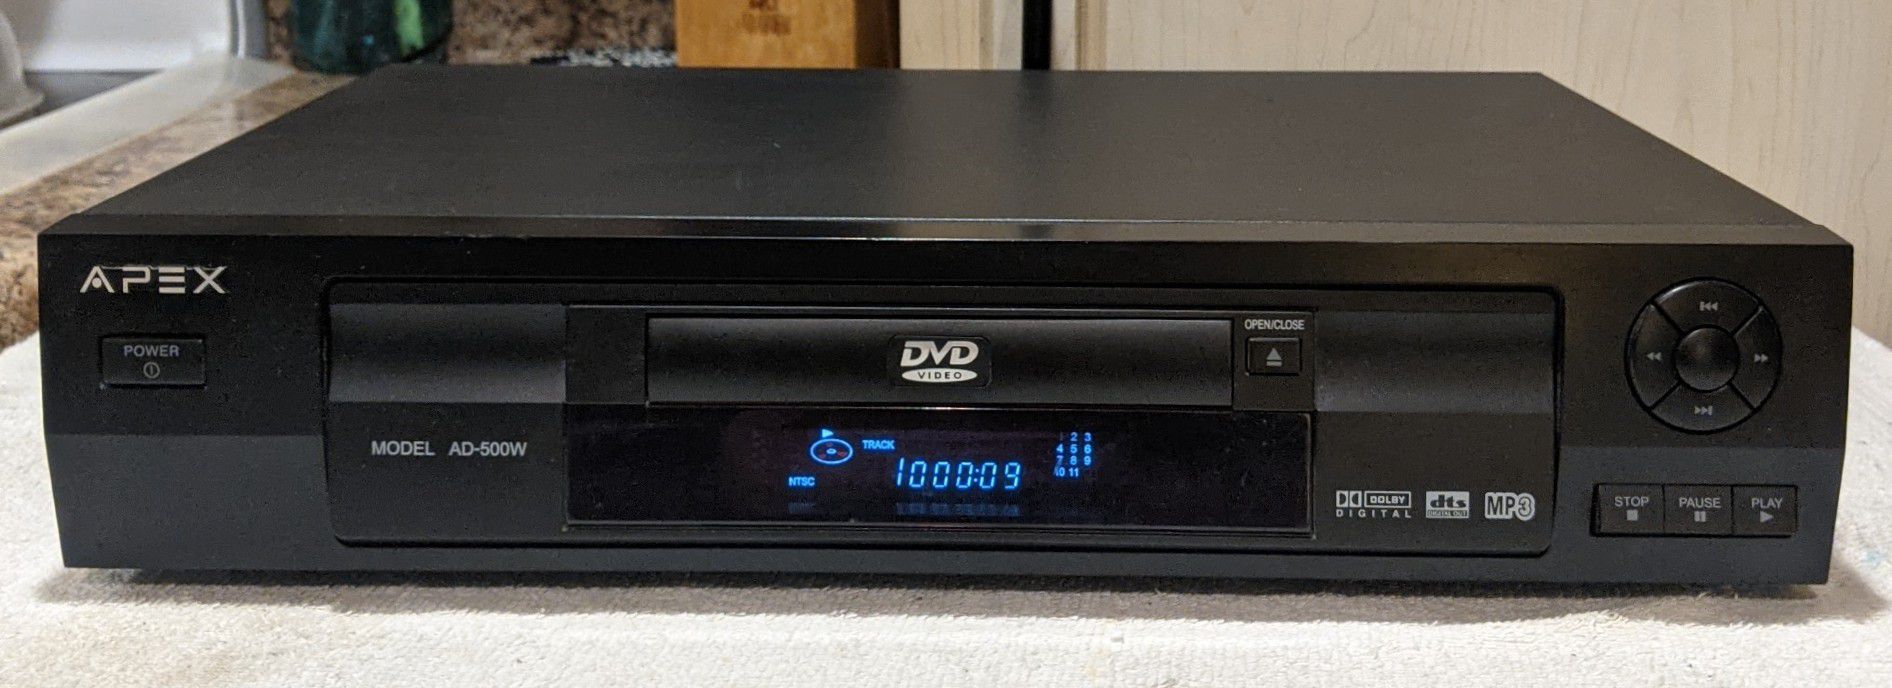 Apex Single Disc CD or DVD Player